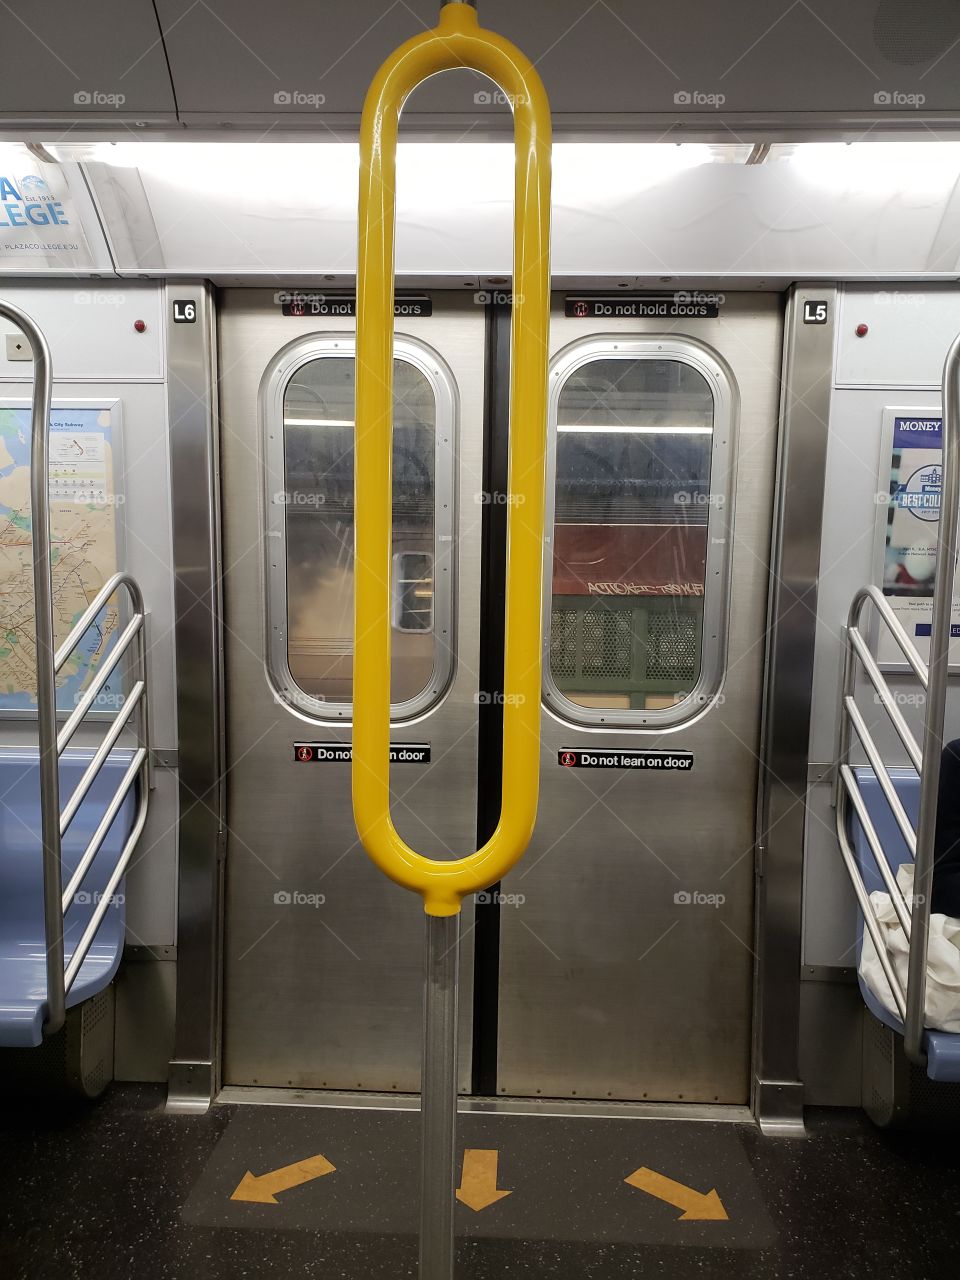 Q Train in NYC